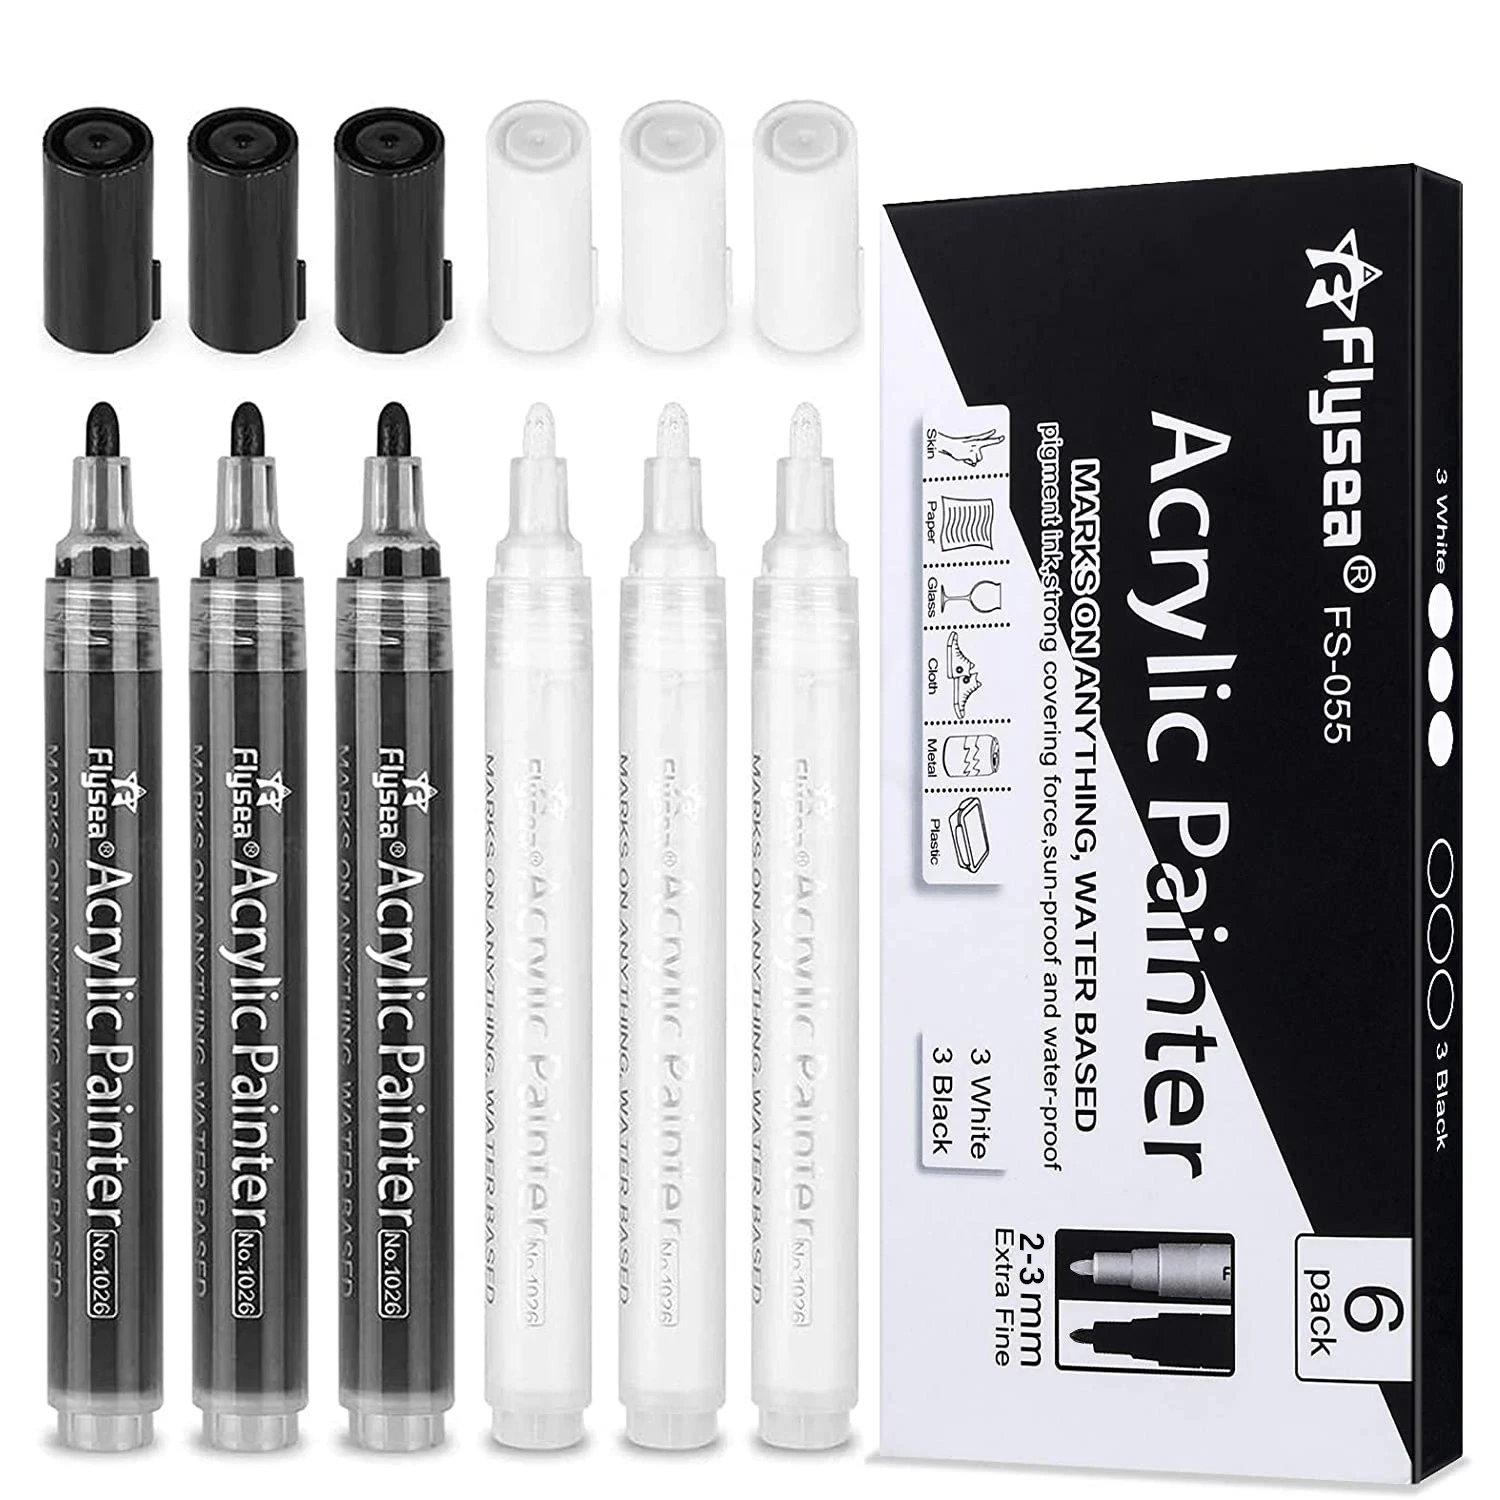 

3 Black 3 White Paint Markers 2mm Tip Acrylic Paint Pens for Rock Painting Stone Water-Based Acrylic Paint Sets